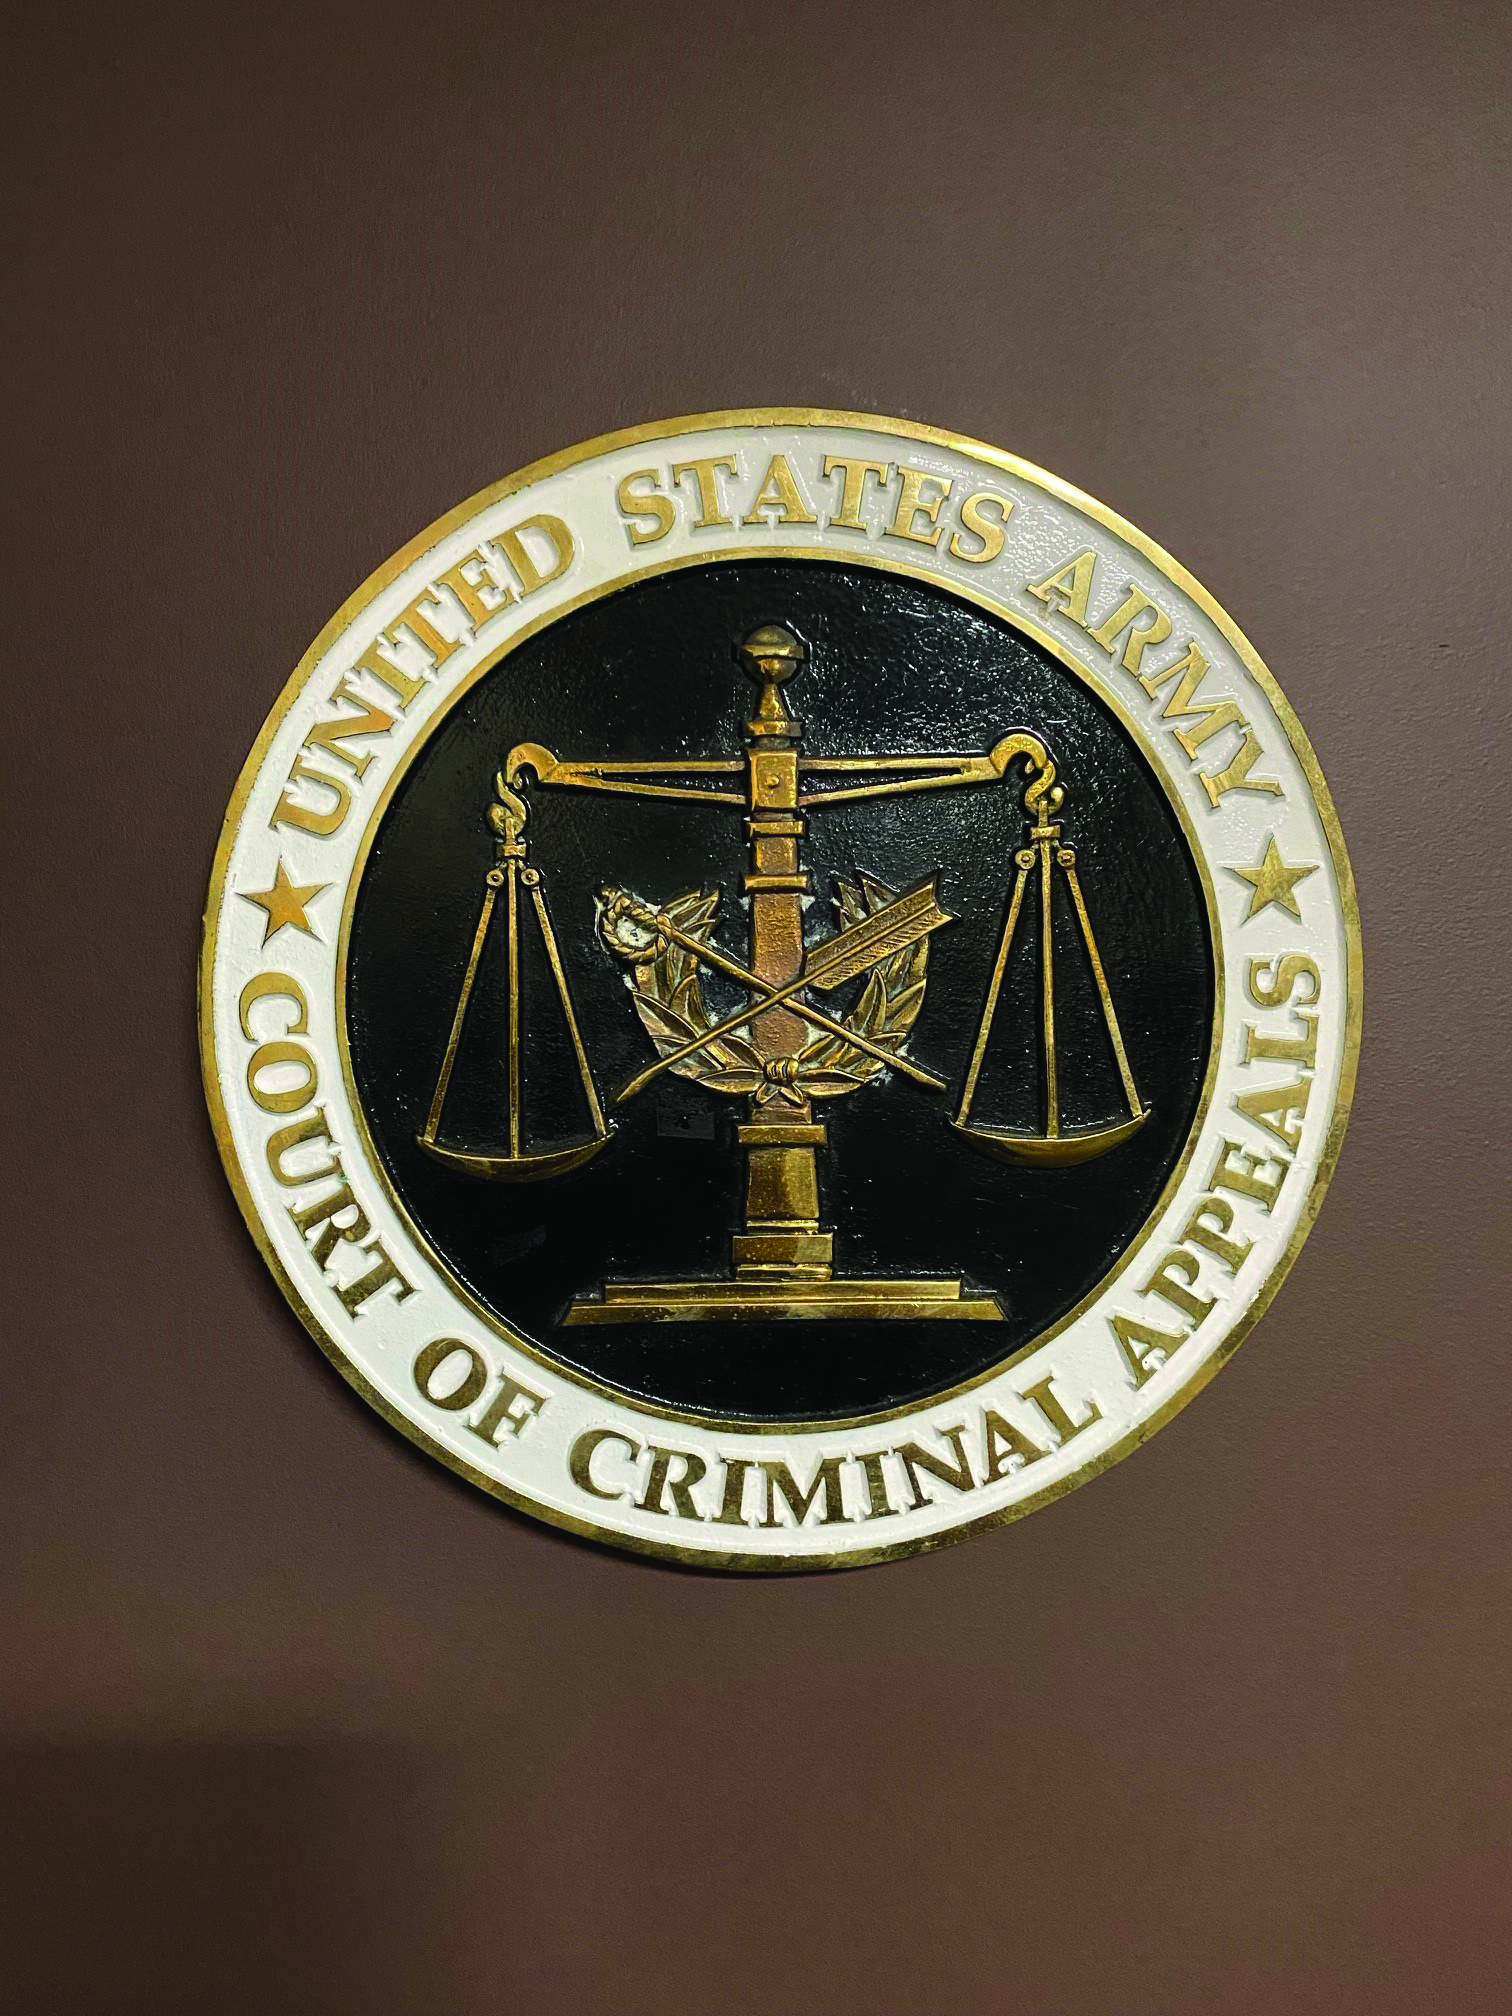 The seal of the U.S. Army Court of Criminal
        Appeals. (Photo courtesy of author)